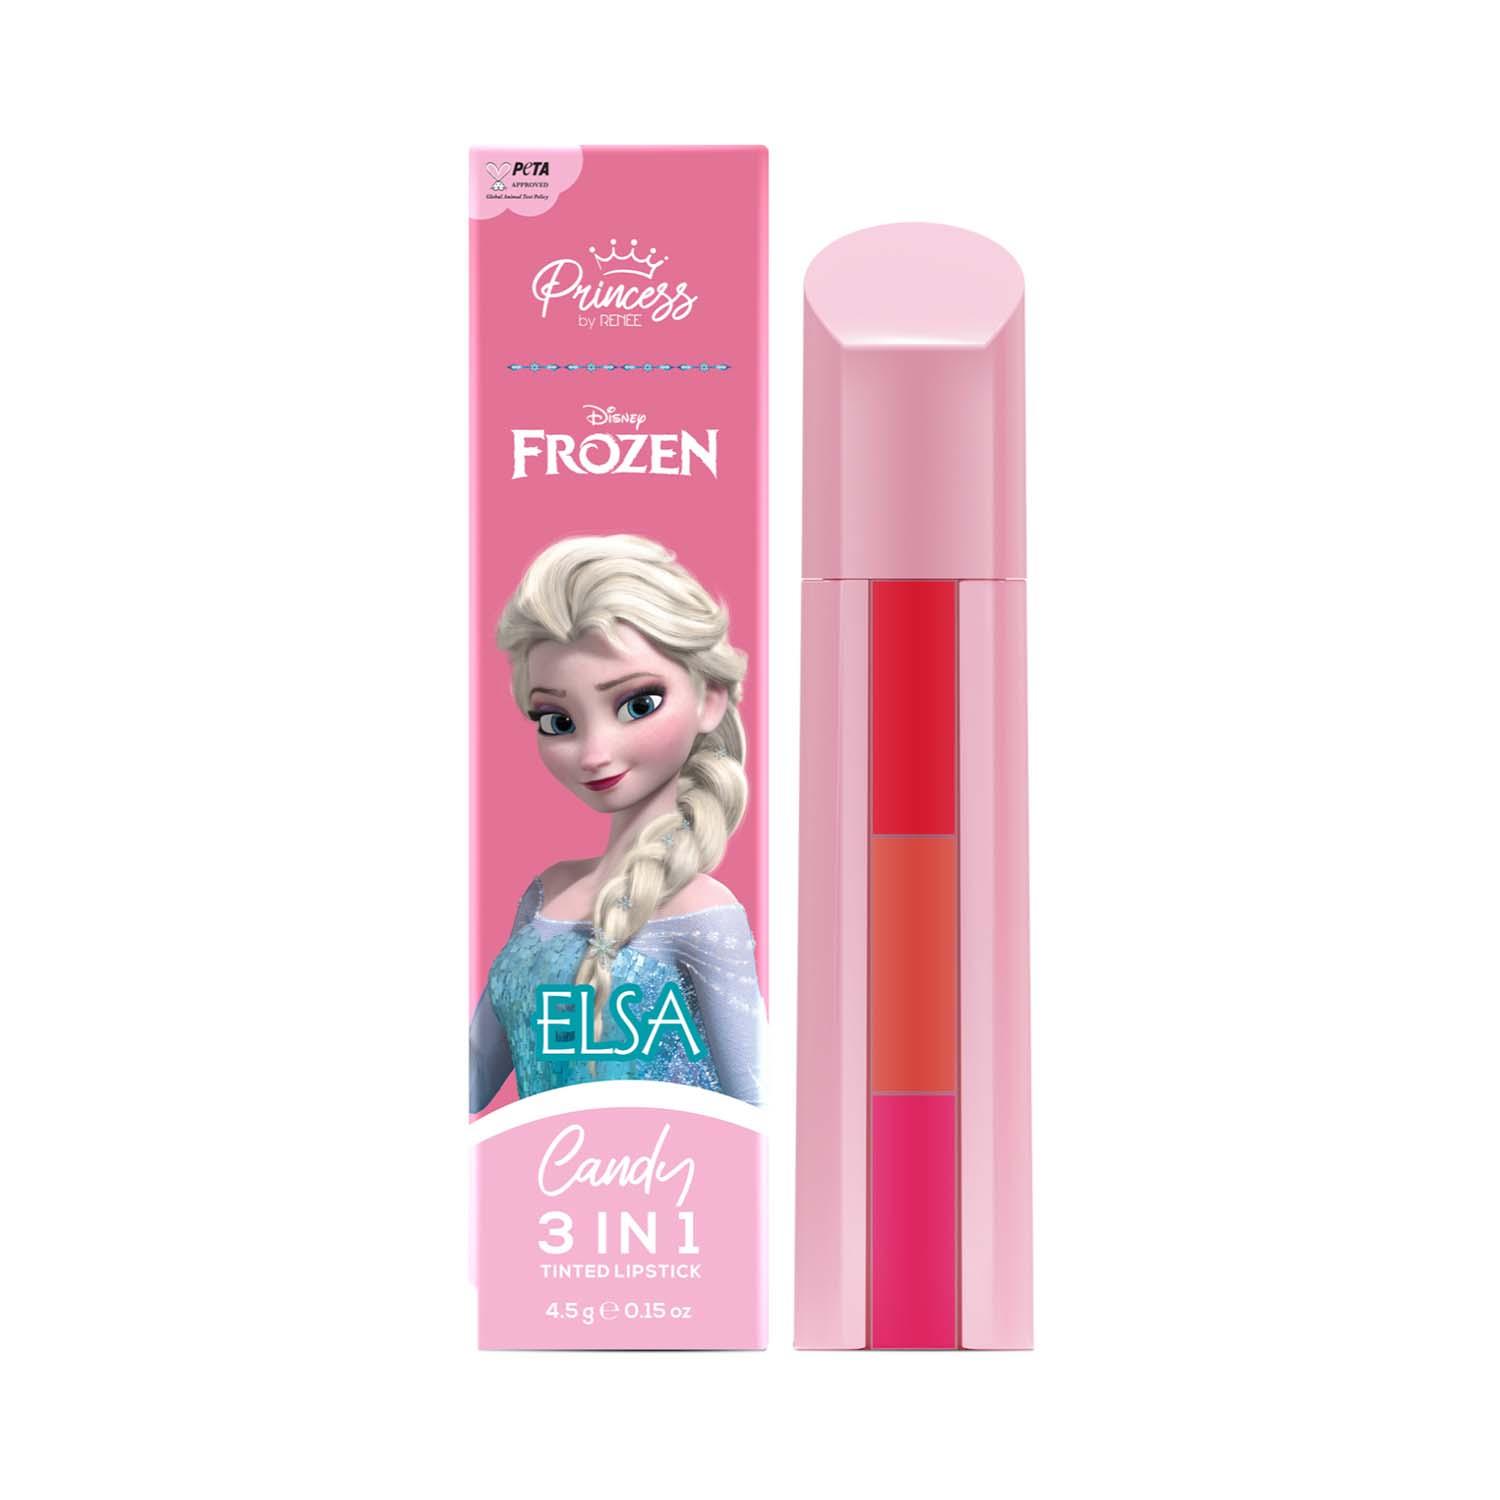 RENEE | Disney Frozen Princess By Renee Cosmetics Candy 3-In-1 Tinted Lipstick (4.5 g)